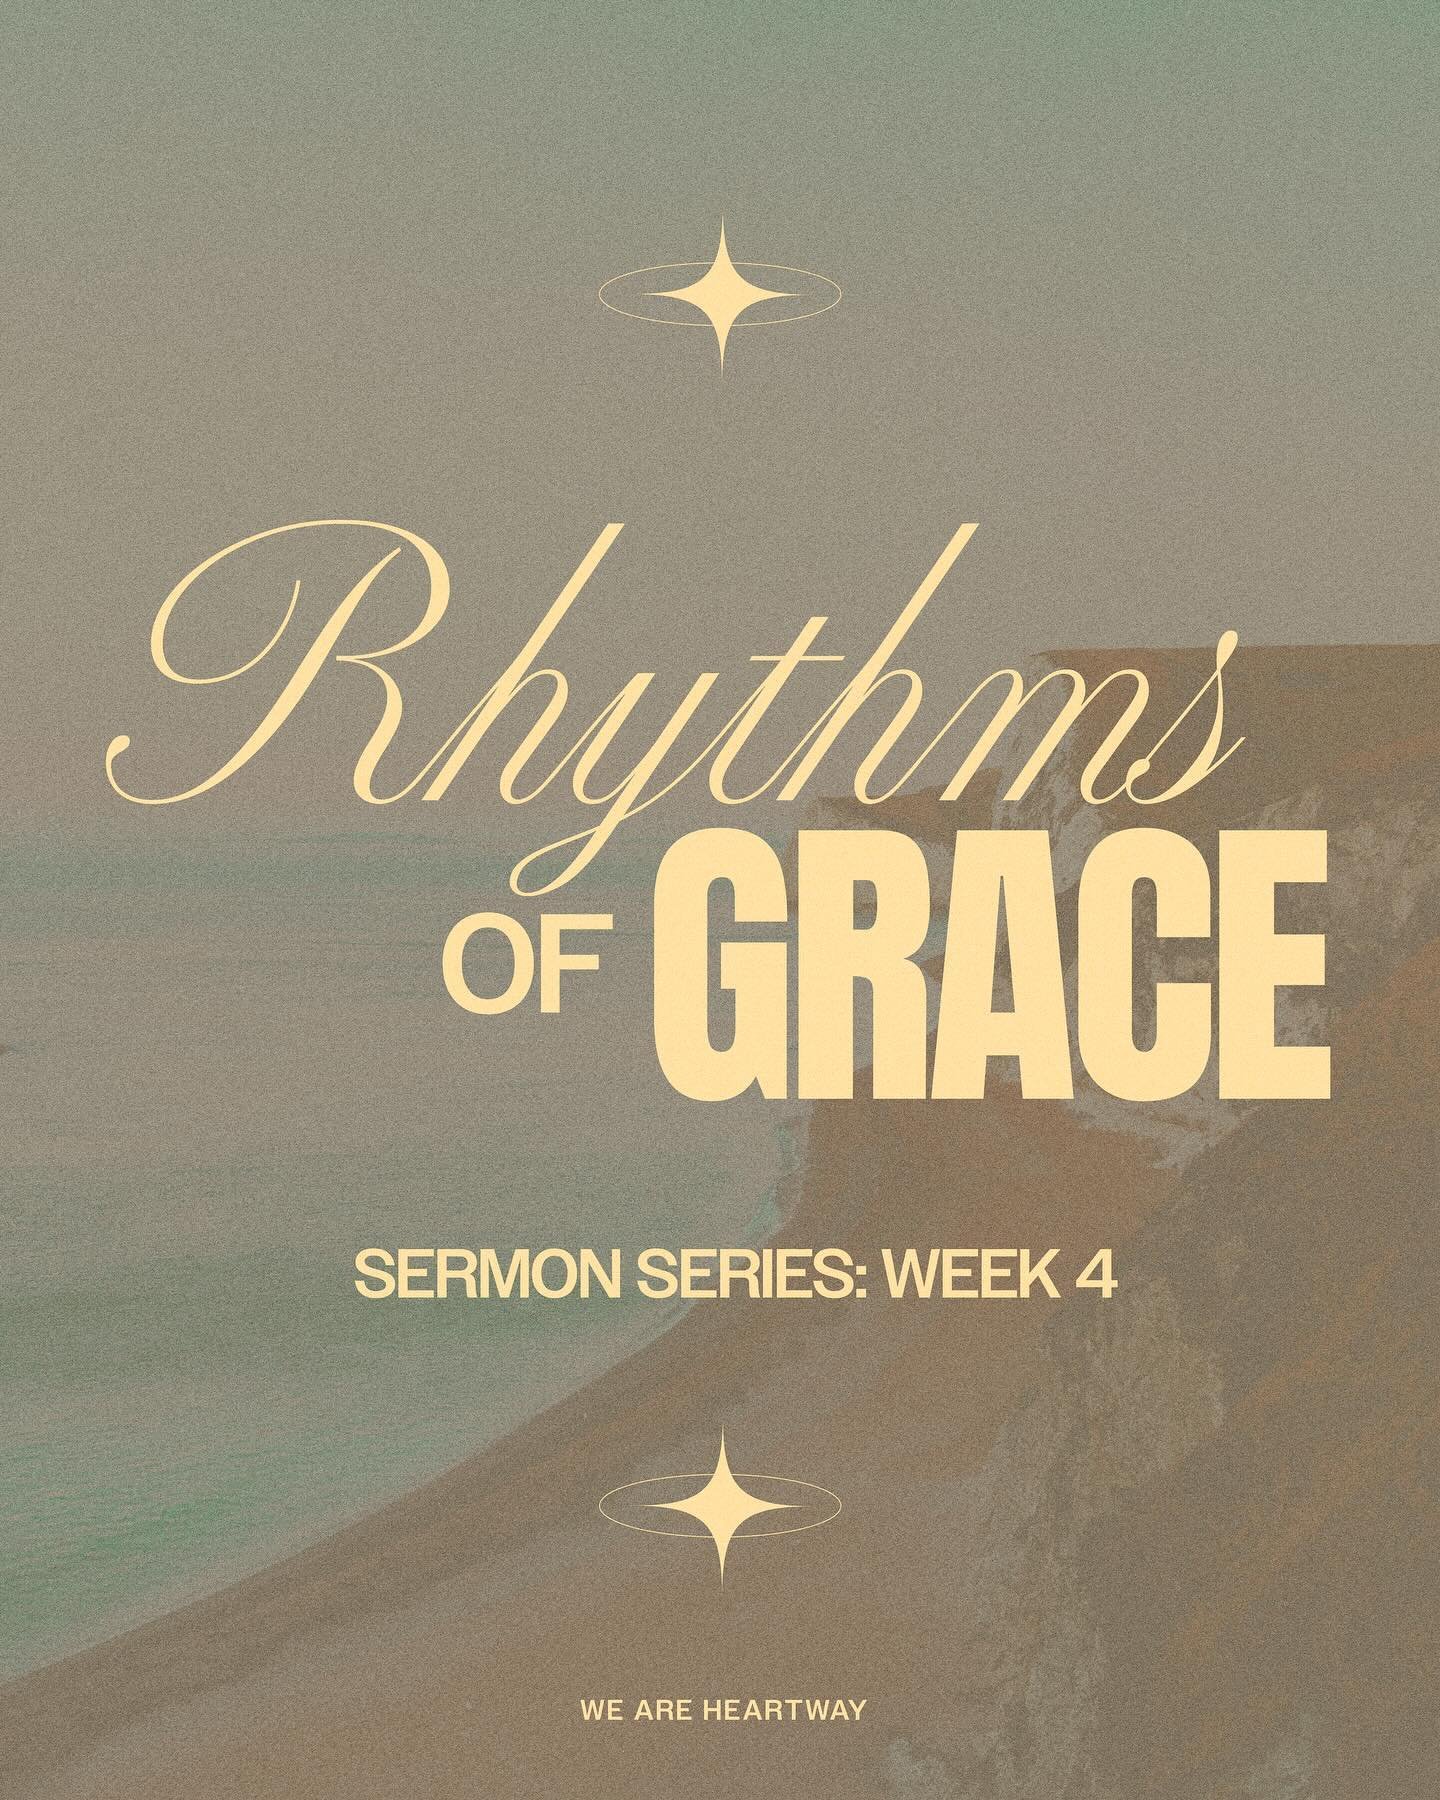 Join us this Sunday for the fourth week of our &ldquo;Rhythm and Grace&rdquo; sermon series, where we&rsquo;ll also be celebrating Mother&rsquo;s Day!🌸

This series has been all about finding balance in our lives and experiencing the grace of God in